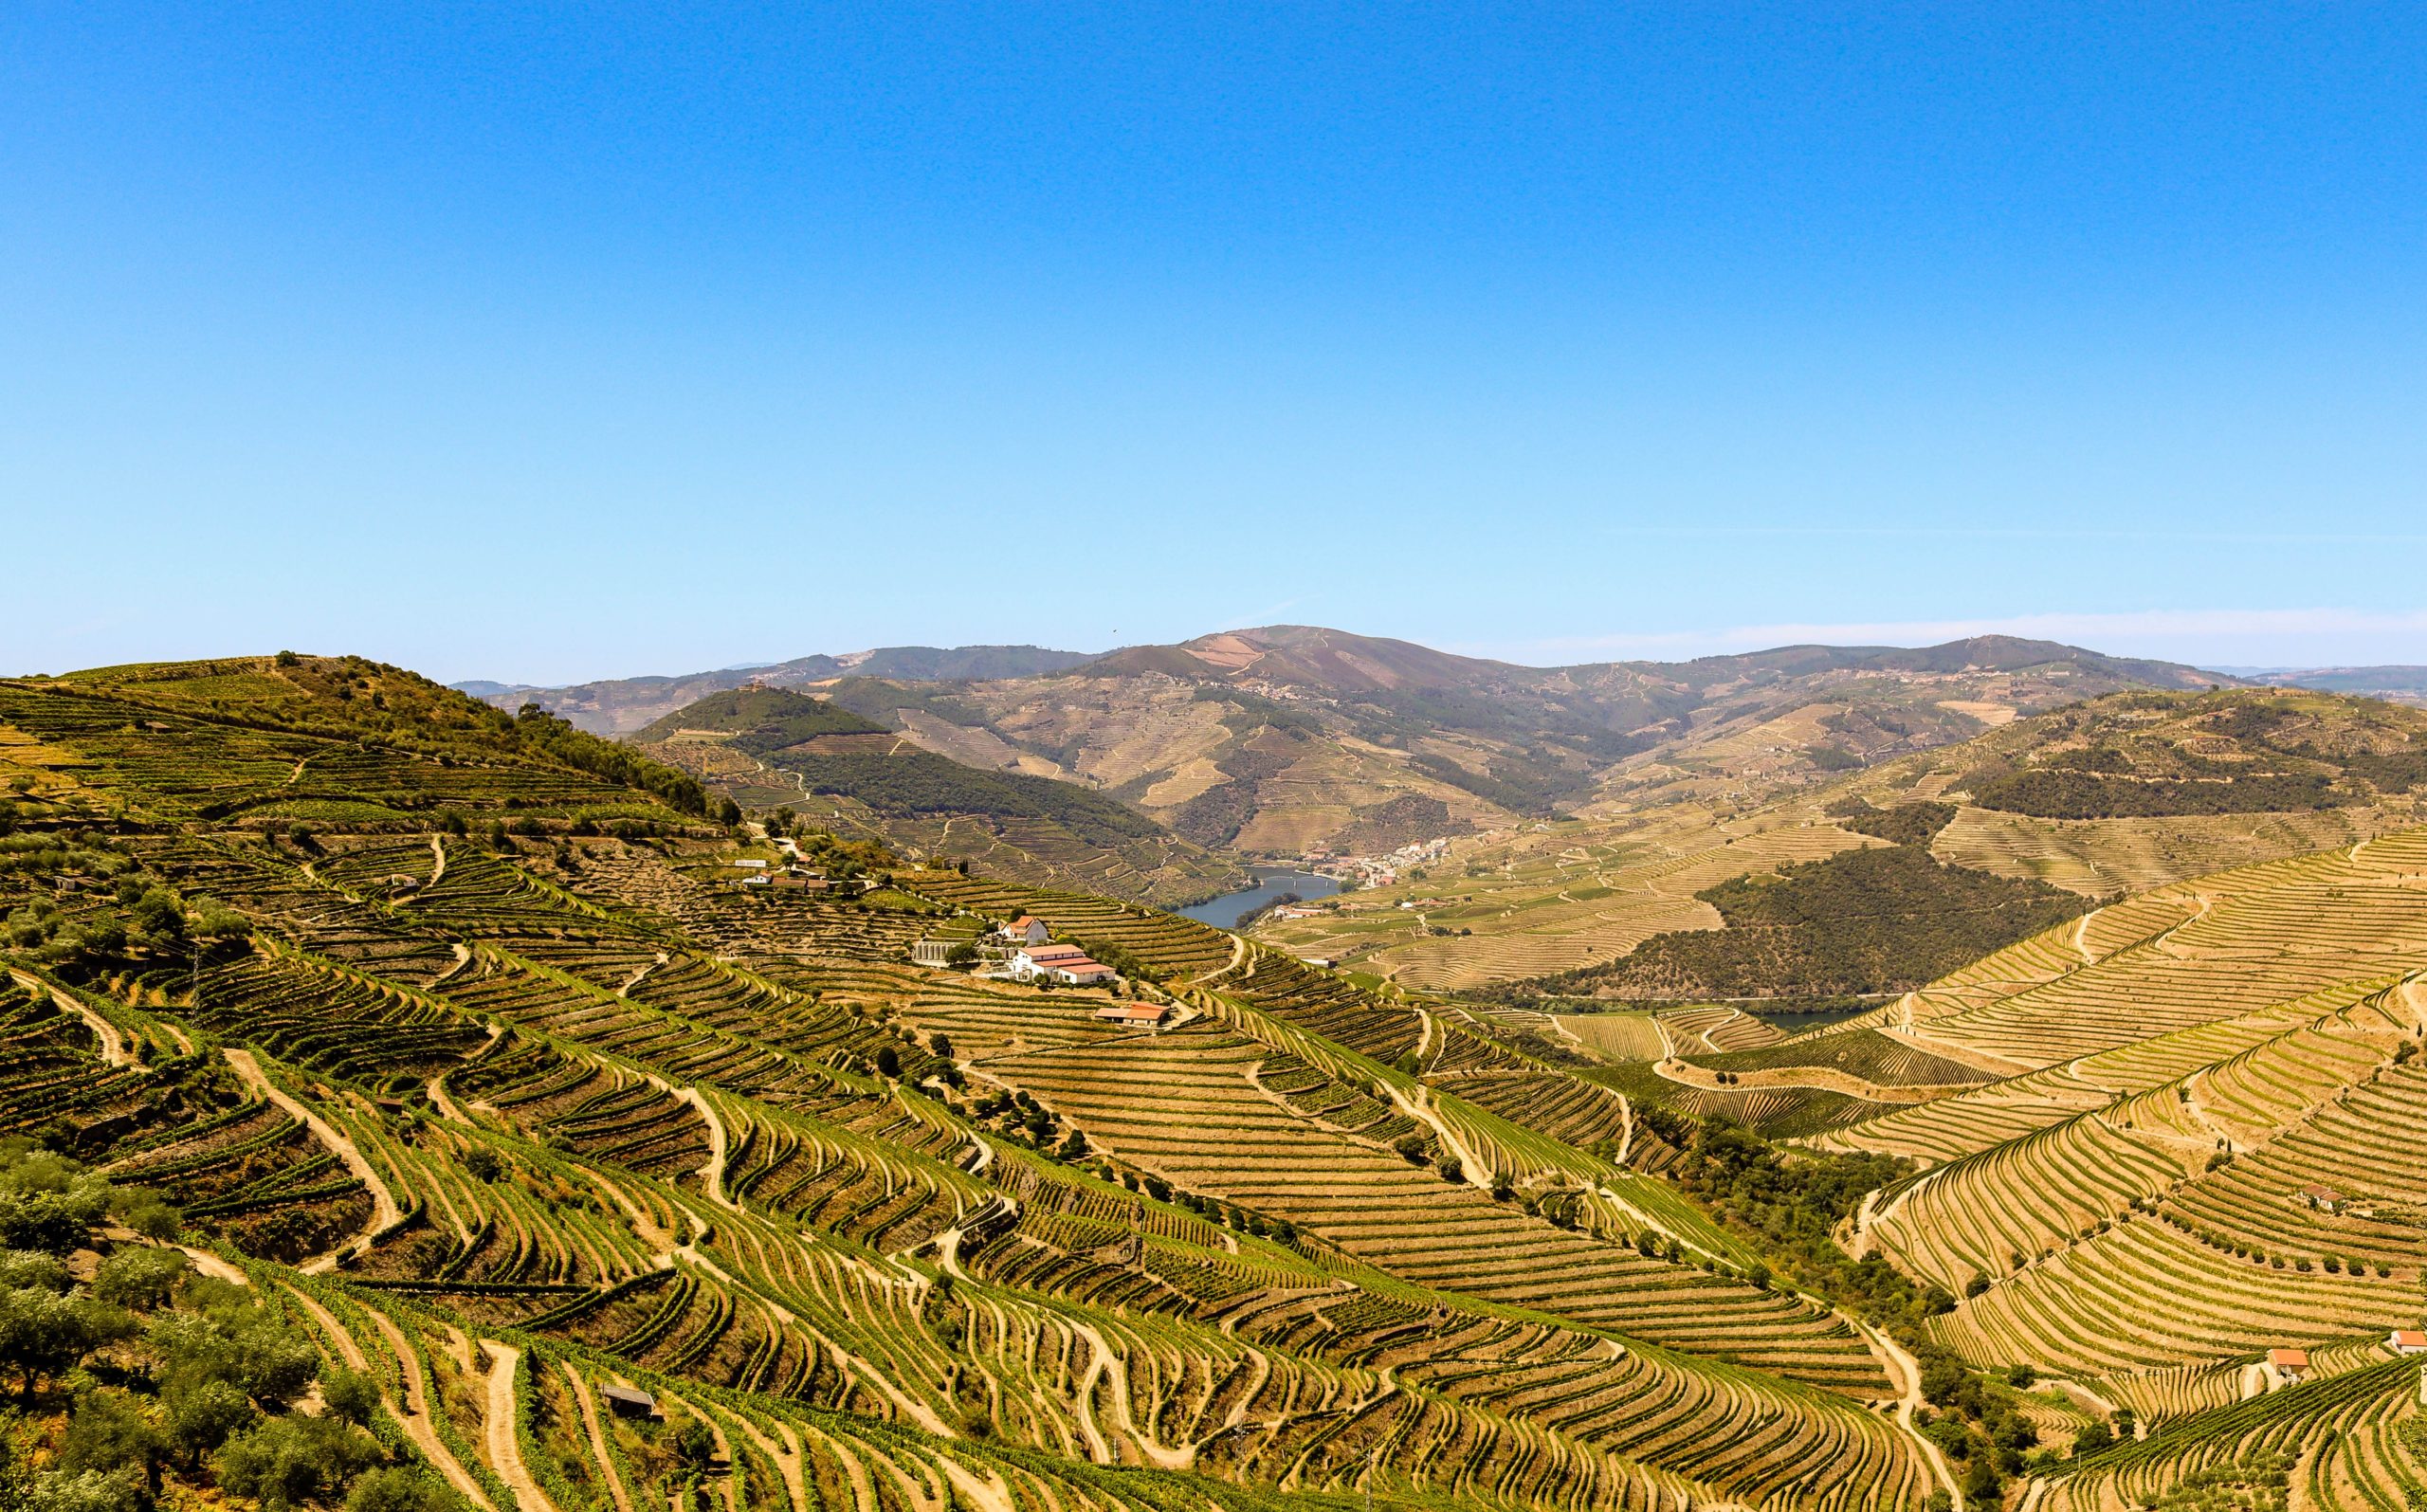 5 Of The Best Wineries In Douro Valley Portugal You Should Visit